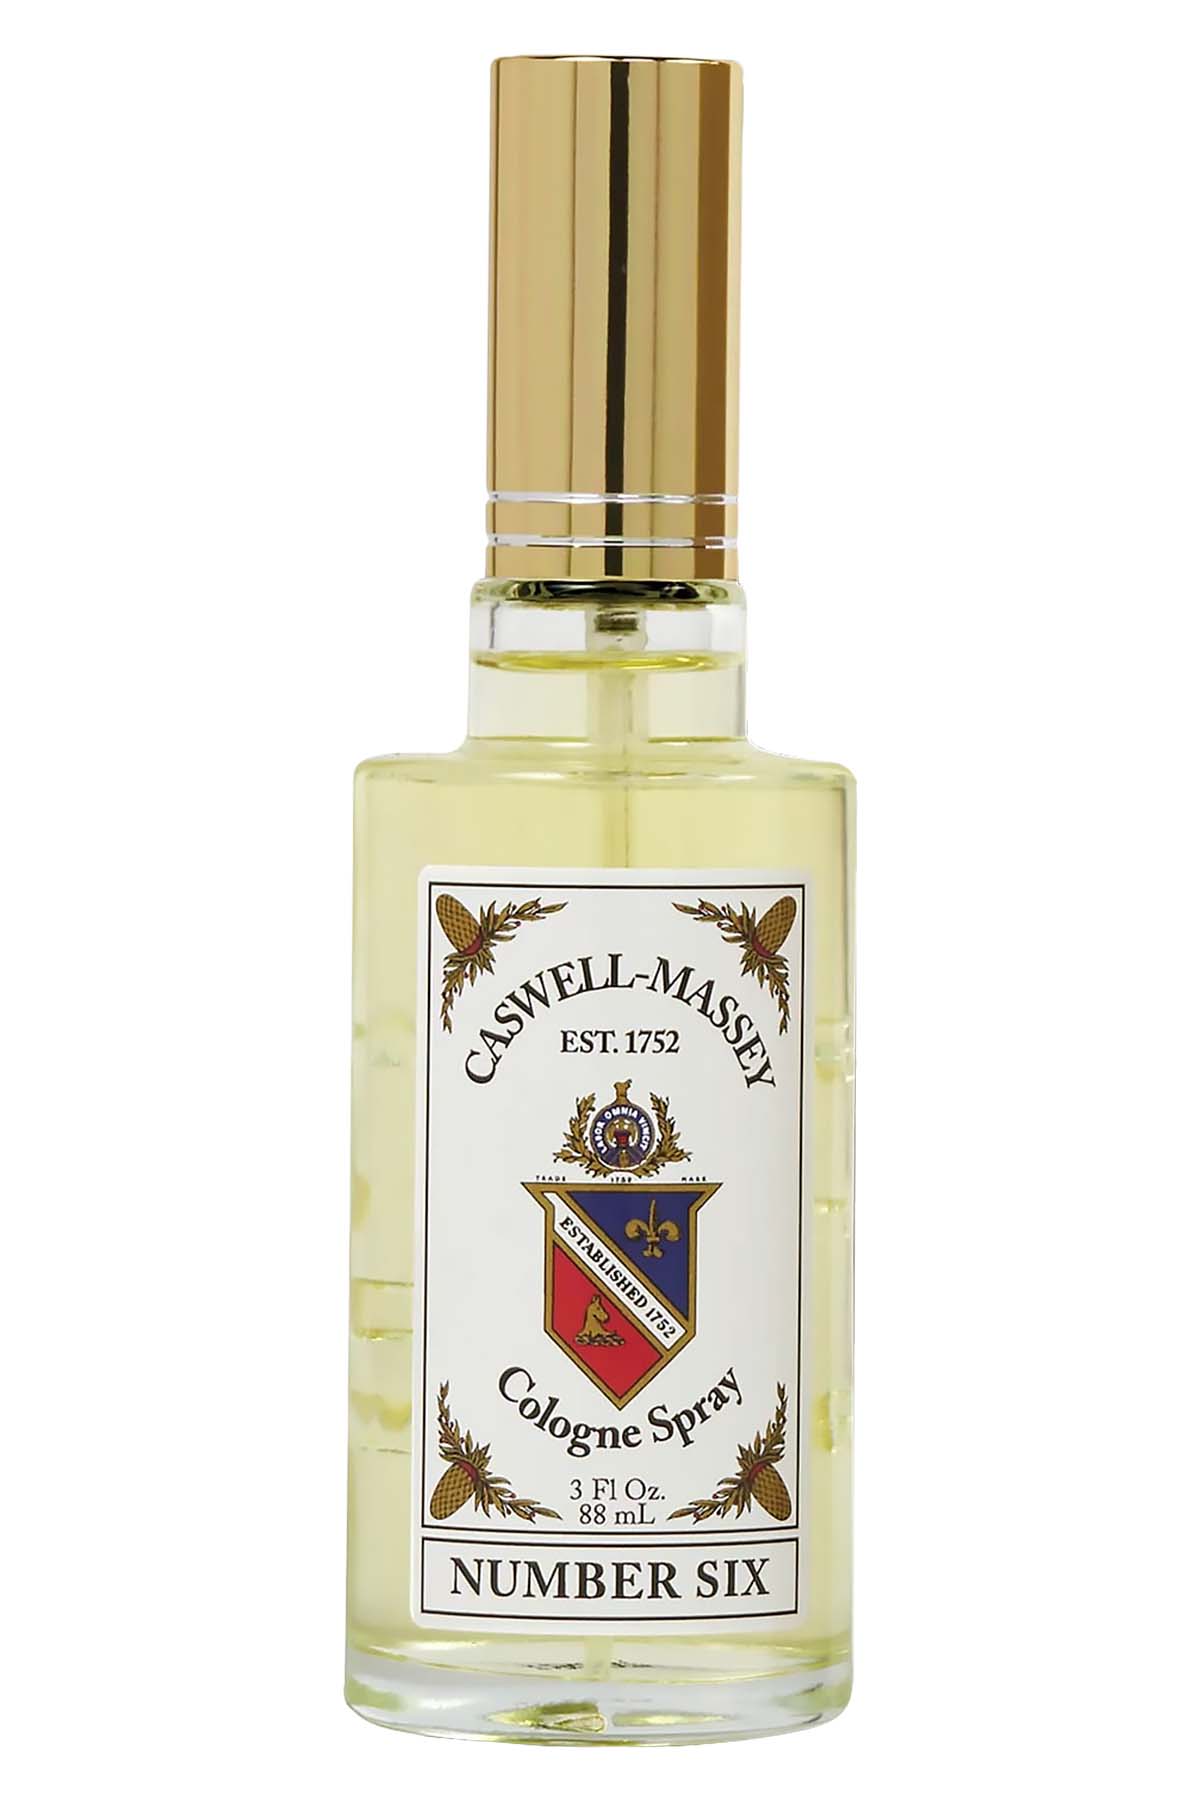 Caswell Massey Number Six Cologne